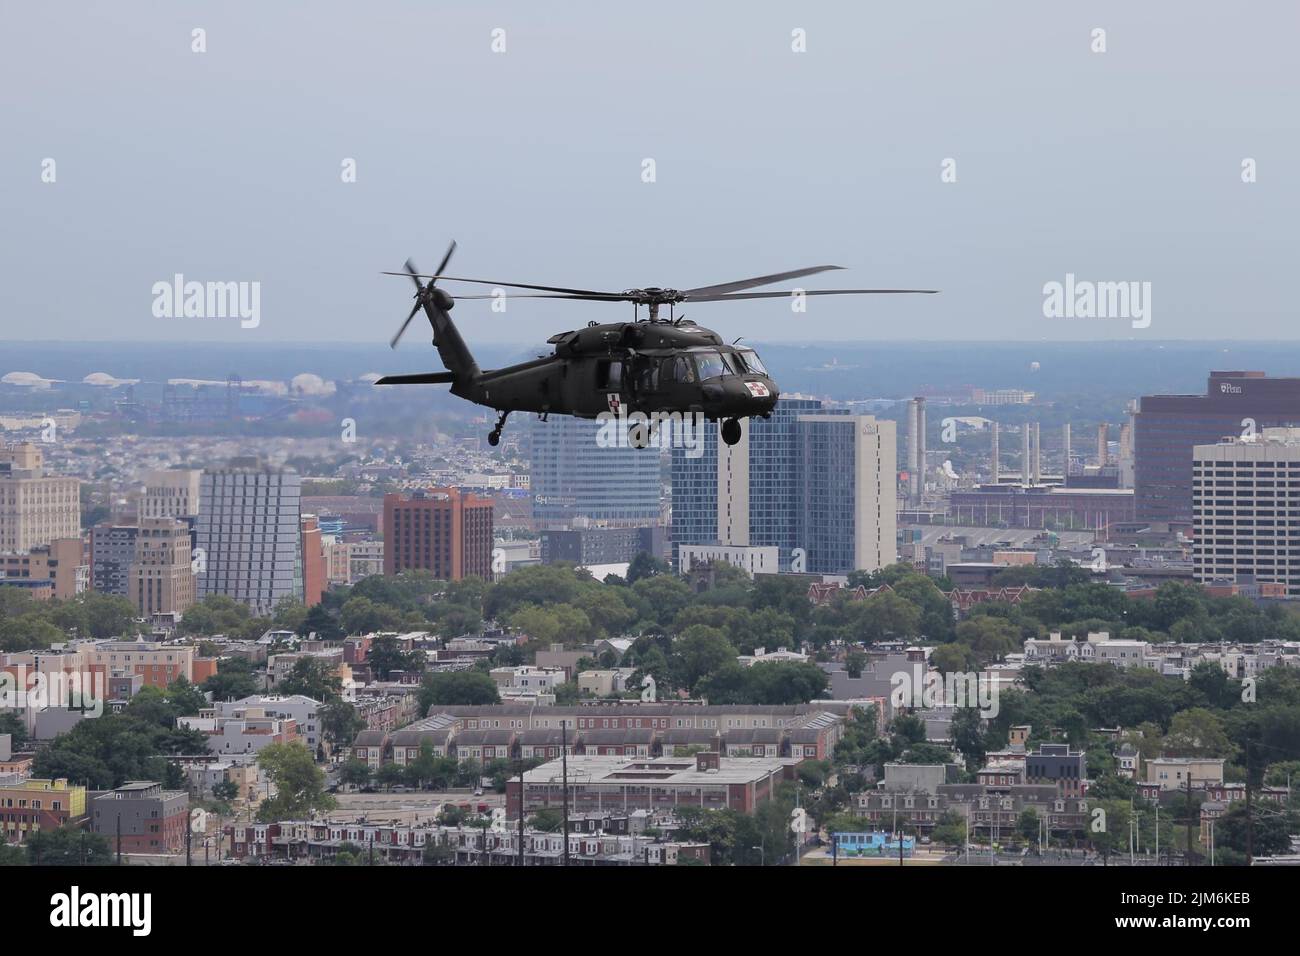 A UH-60 Black Hawk helicopter from the Pennsylvania National Guard’s 28th Expeditionary Combat Aviation Brigade flies over Philadelphia during a recent Dense Urban Terrain exercise. The exercise, which ran from July 25 to 29, was conducted by Task Force 46, a 600-personnel chemical, biological, radiological or nuclear (CBRN) response element, comprised of National Guard units from states across the country. (U.S. Army photo by Sgt. Eric Smith) Stock Photo